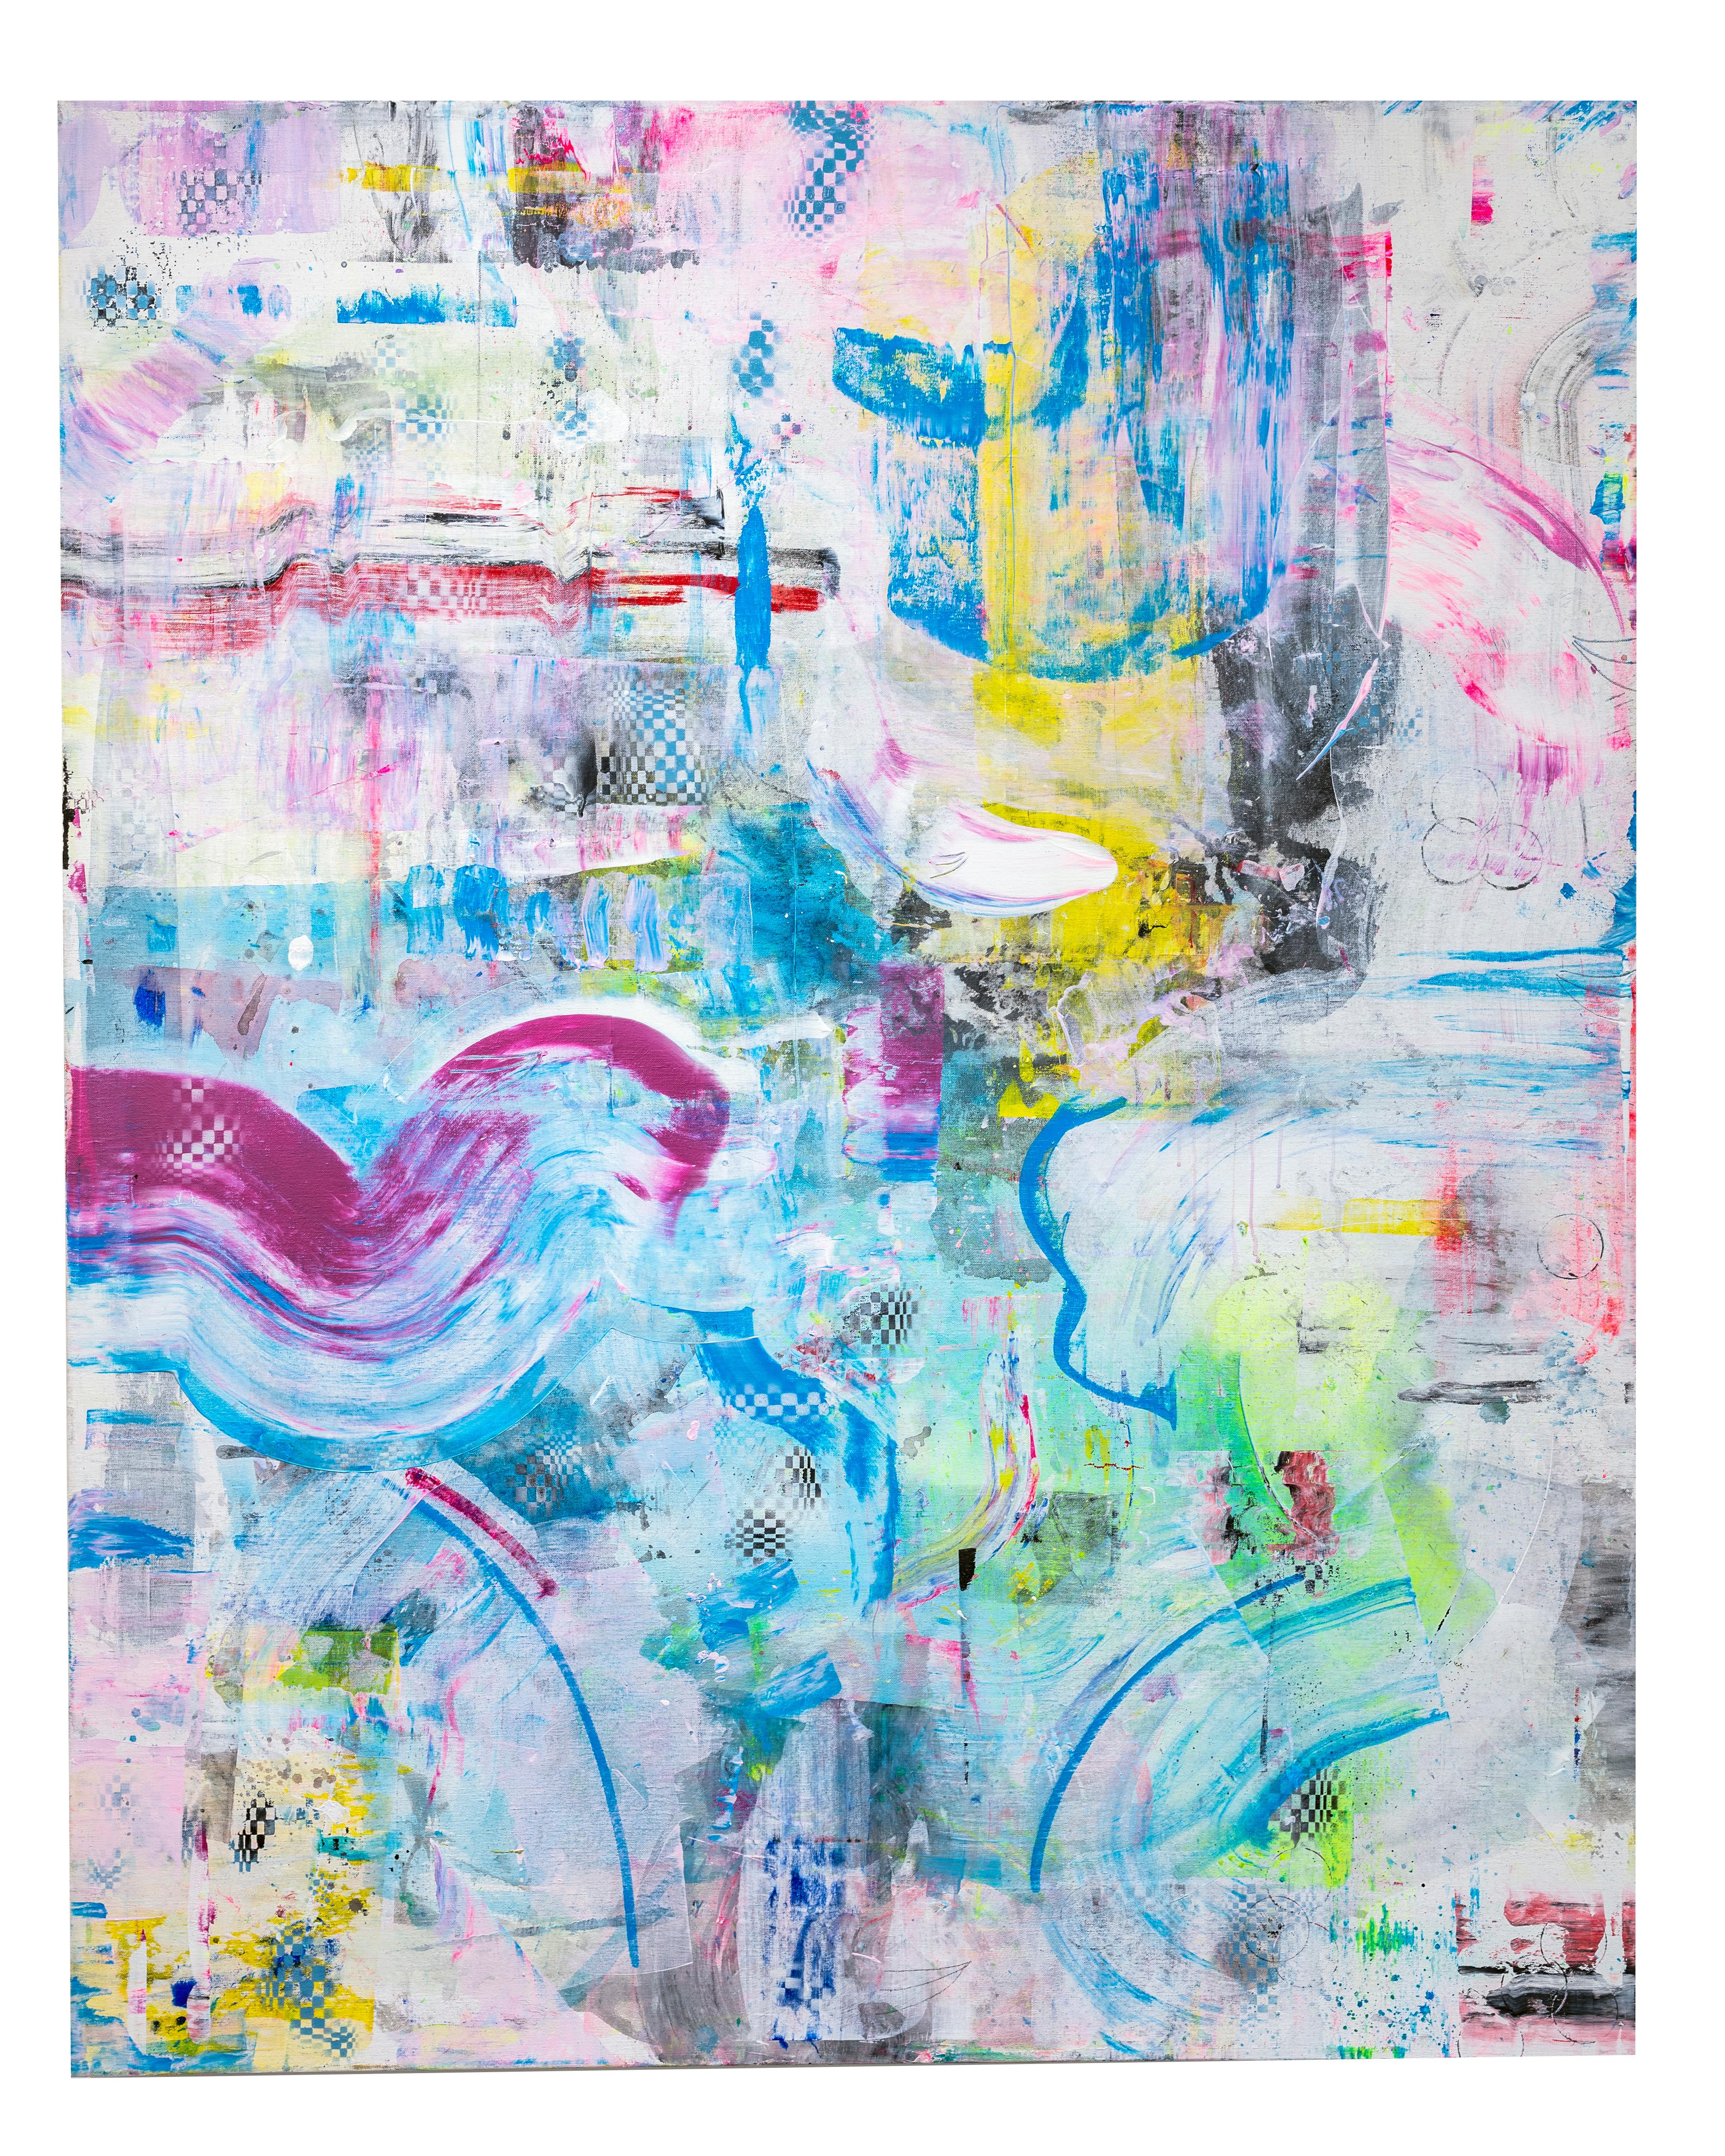 Martin Durazo Abstract Painting - Bright colors, medium canvas, abstract, pink, blue, yellow, chaos, energy